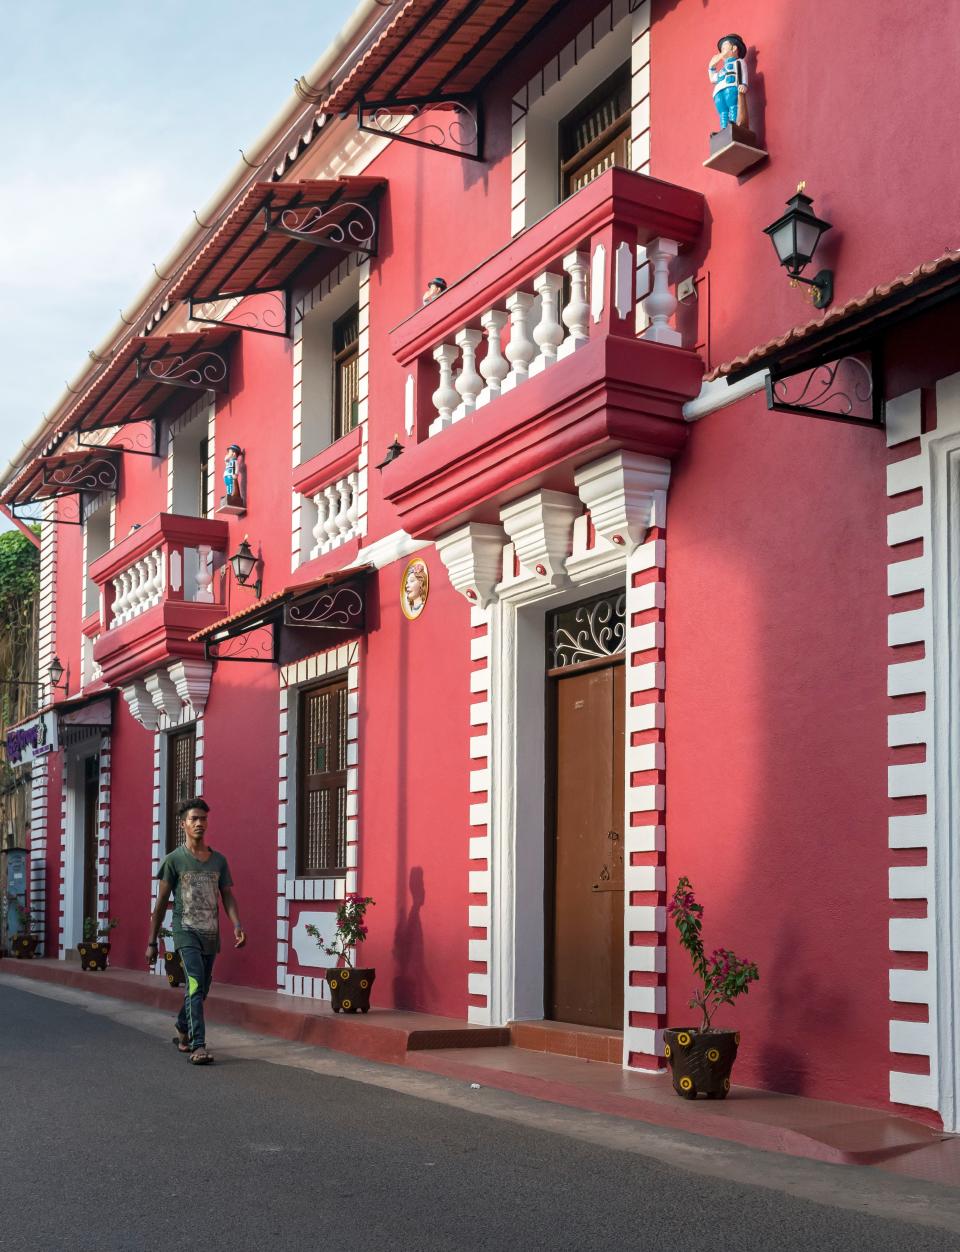 Fontainhas, the Latin Quarter of Panji, India, showcases the influence of Portuguese colonizers on the area. Brightly-colored, Portuguese-style houses sit along the cobblestone streets, and many showcase blue-and-white-tile street markers.